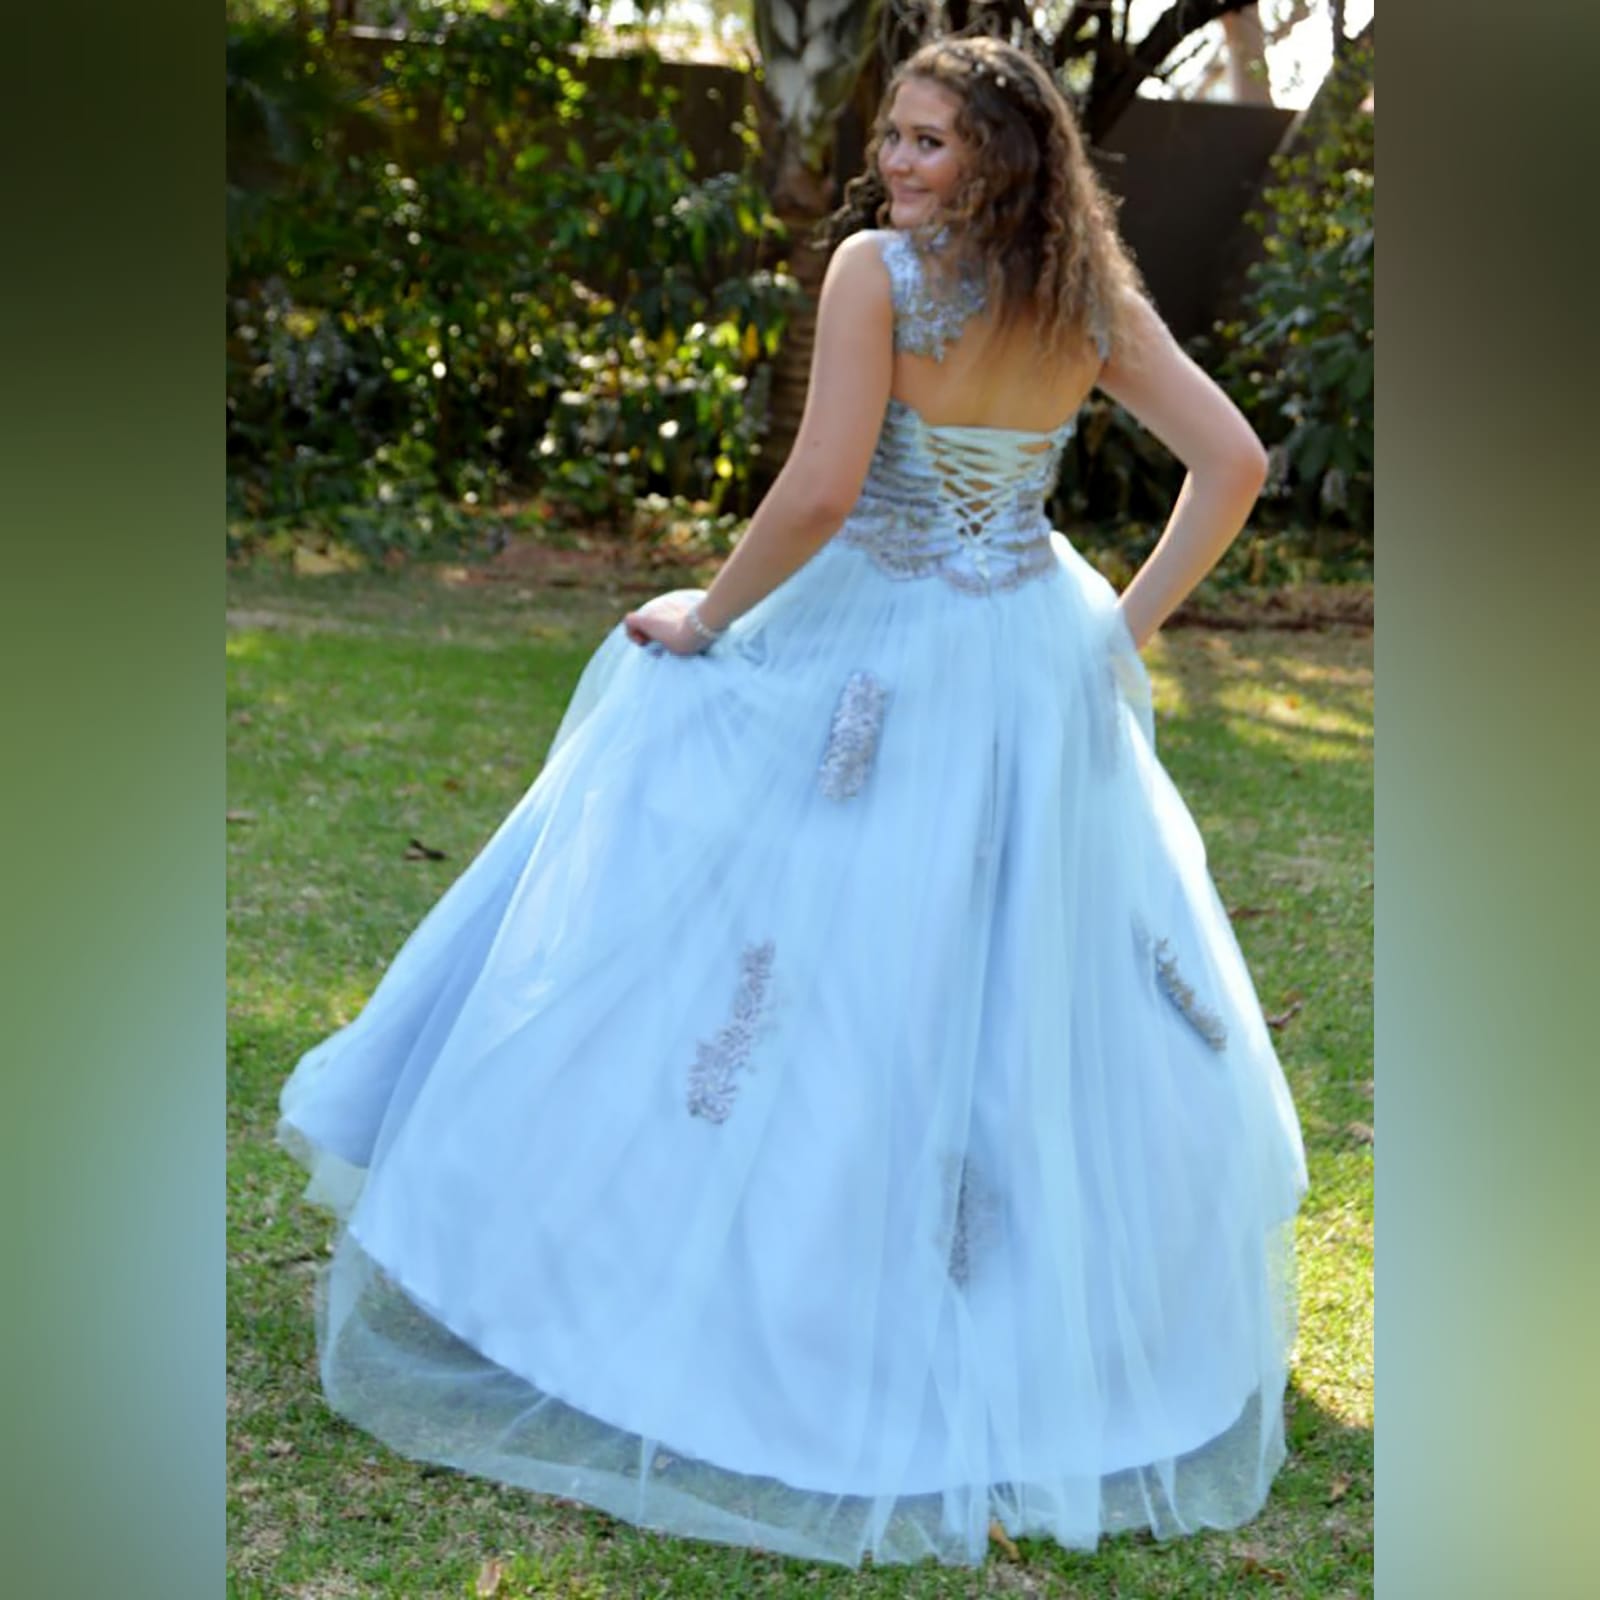 Powder blue and silver prom ball gown dress 4 powder blue and silver prom ball gown dress. With a lace-up back. Bodice detailed with silver lace and beads. Illusion neckline and shoulders. Bottom of the dress with tulle detailed with lace appliques.